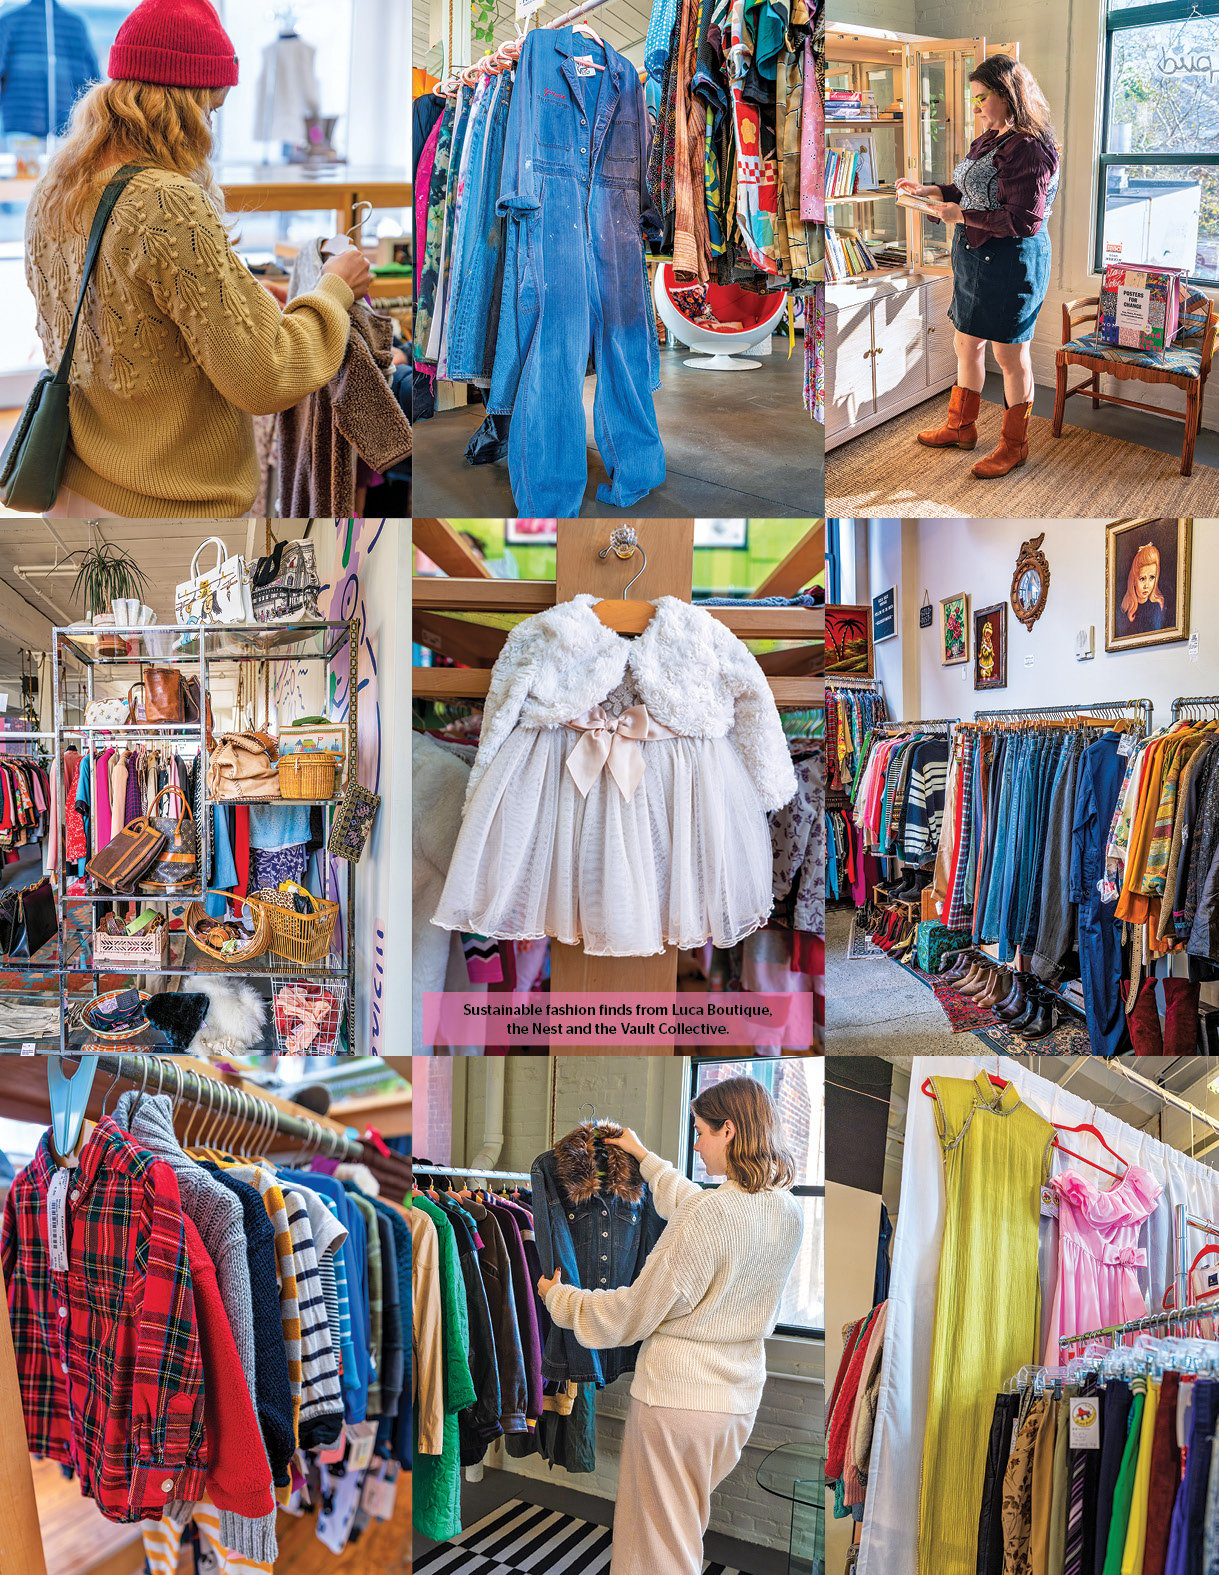 The Professional Organizers Guide to Clothing Consignment & Resale